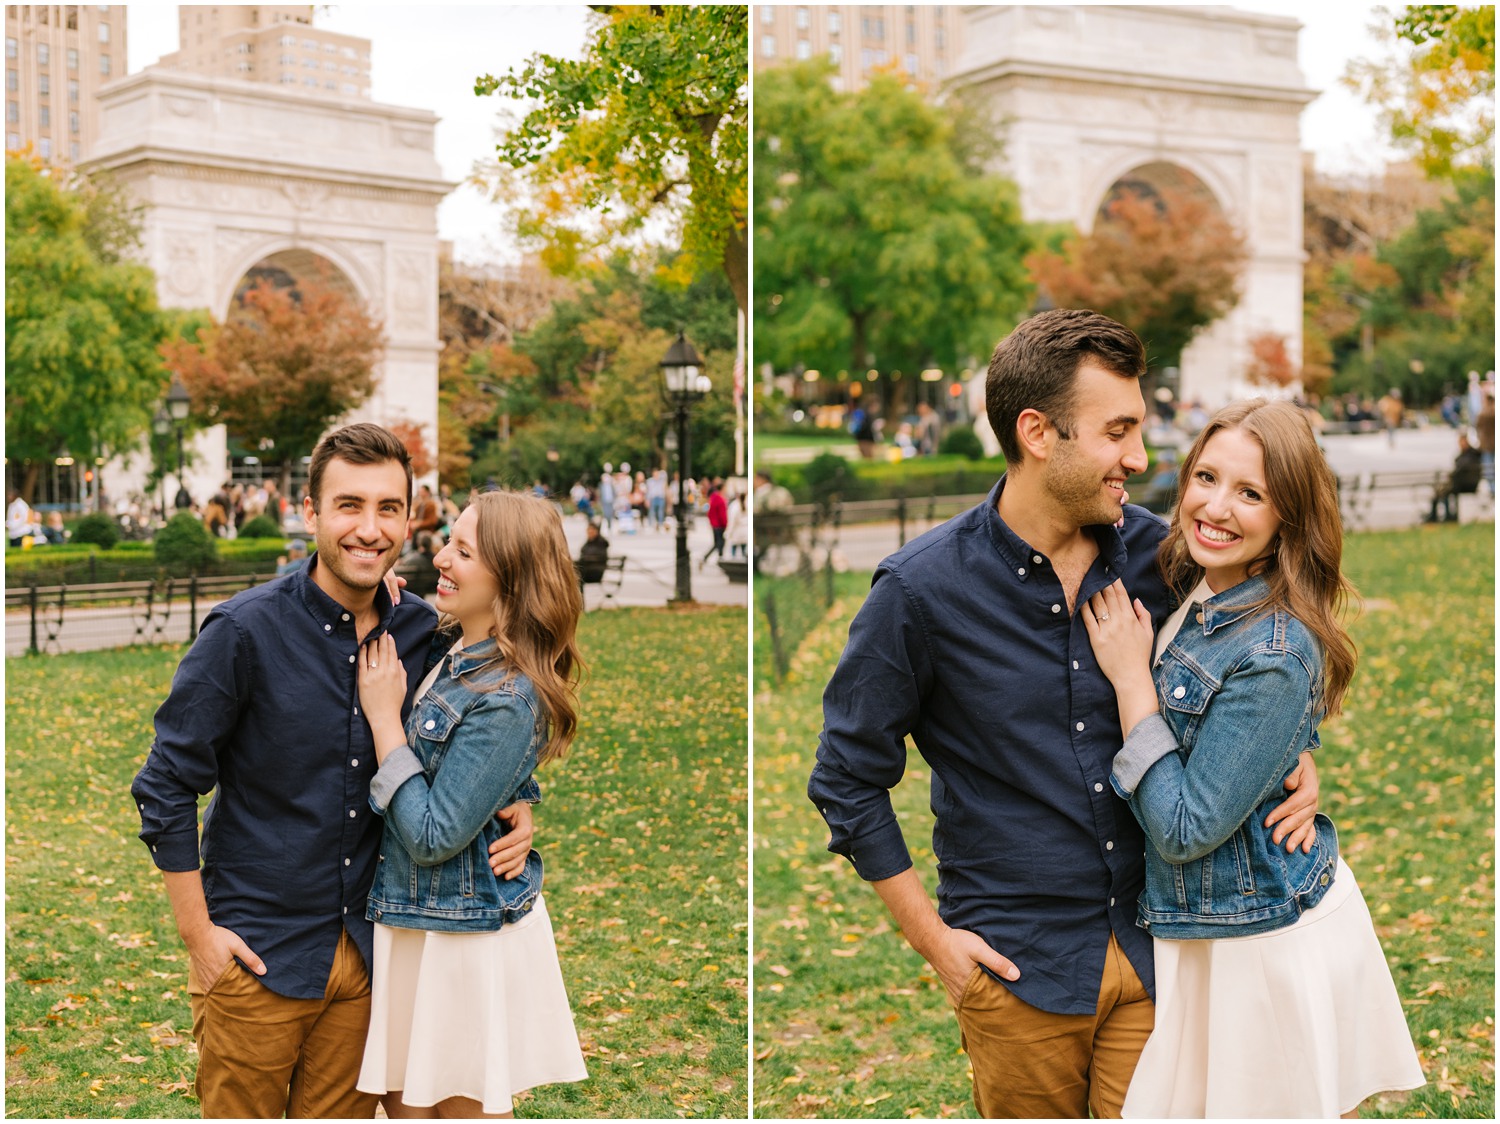 sunset engagement session at Washington Park in NYC